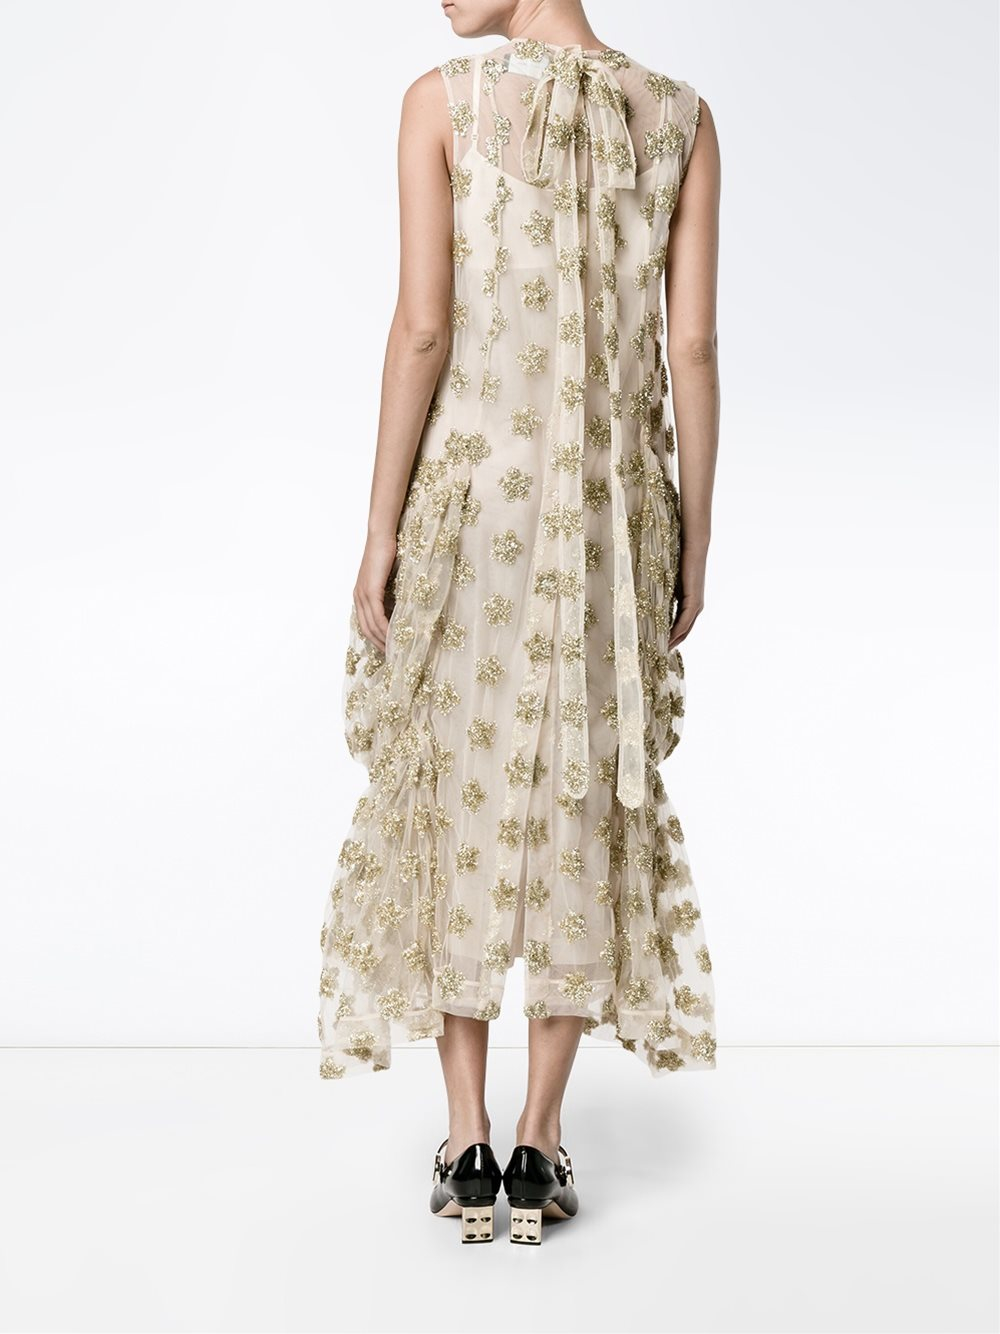 Simone Rocha Lace Floral Tinsel Maxi Dress in Gold/Nude (Metallic) - Lyst